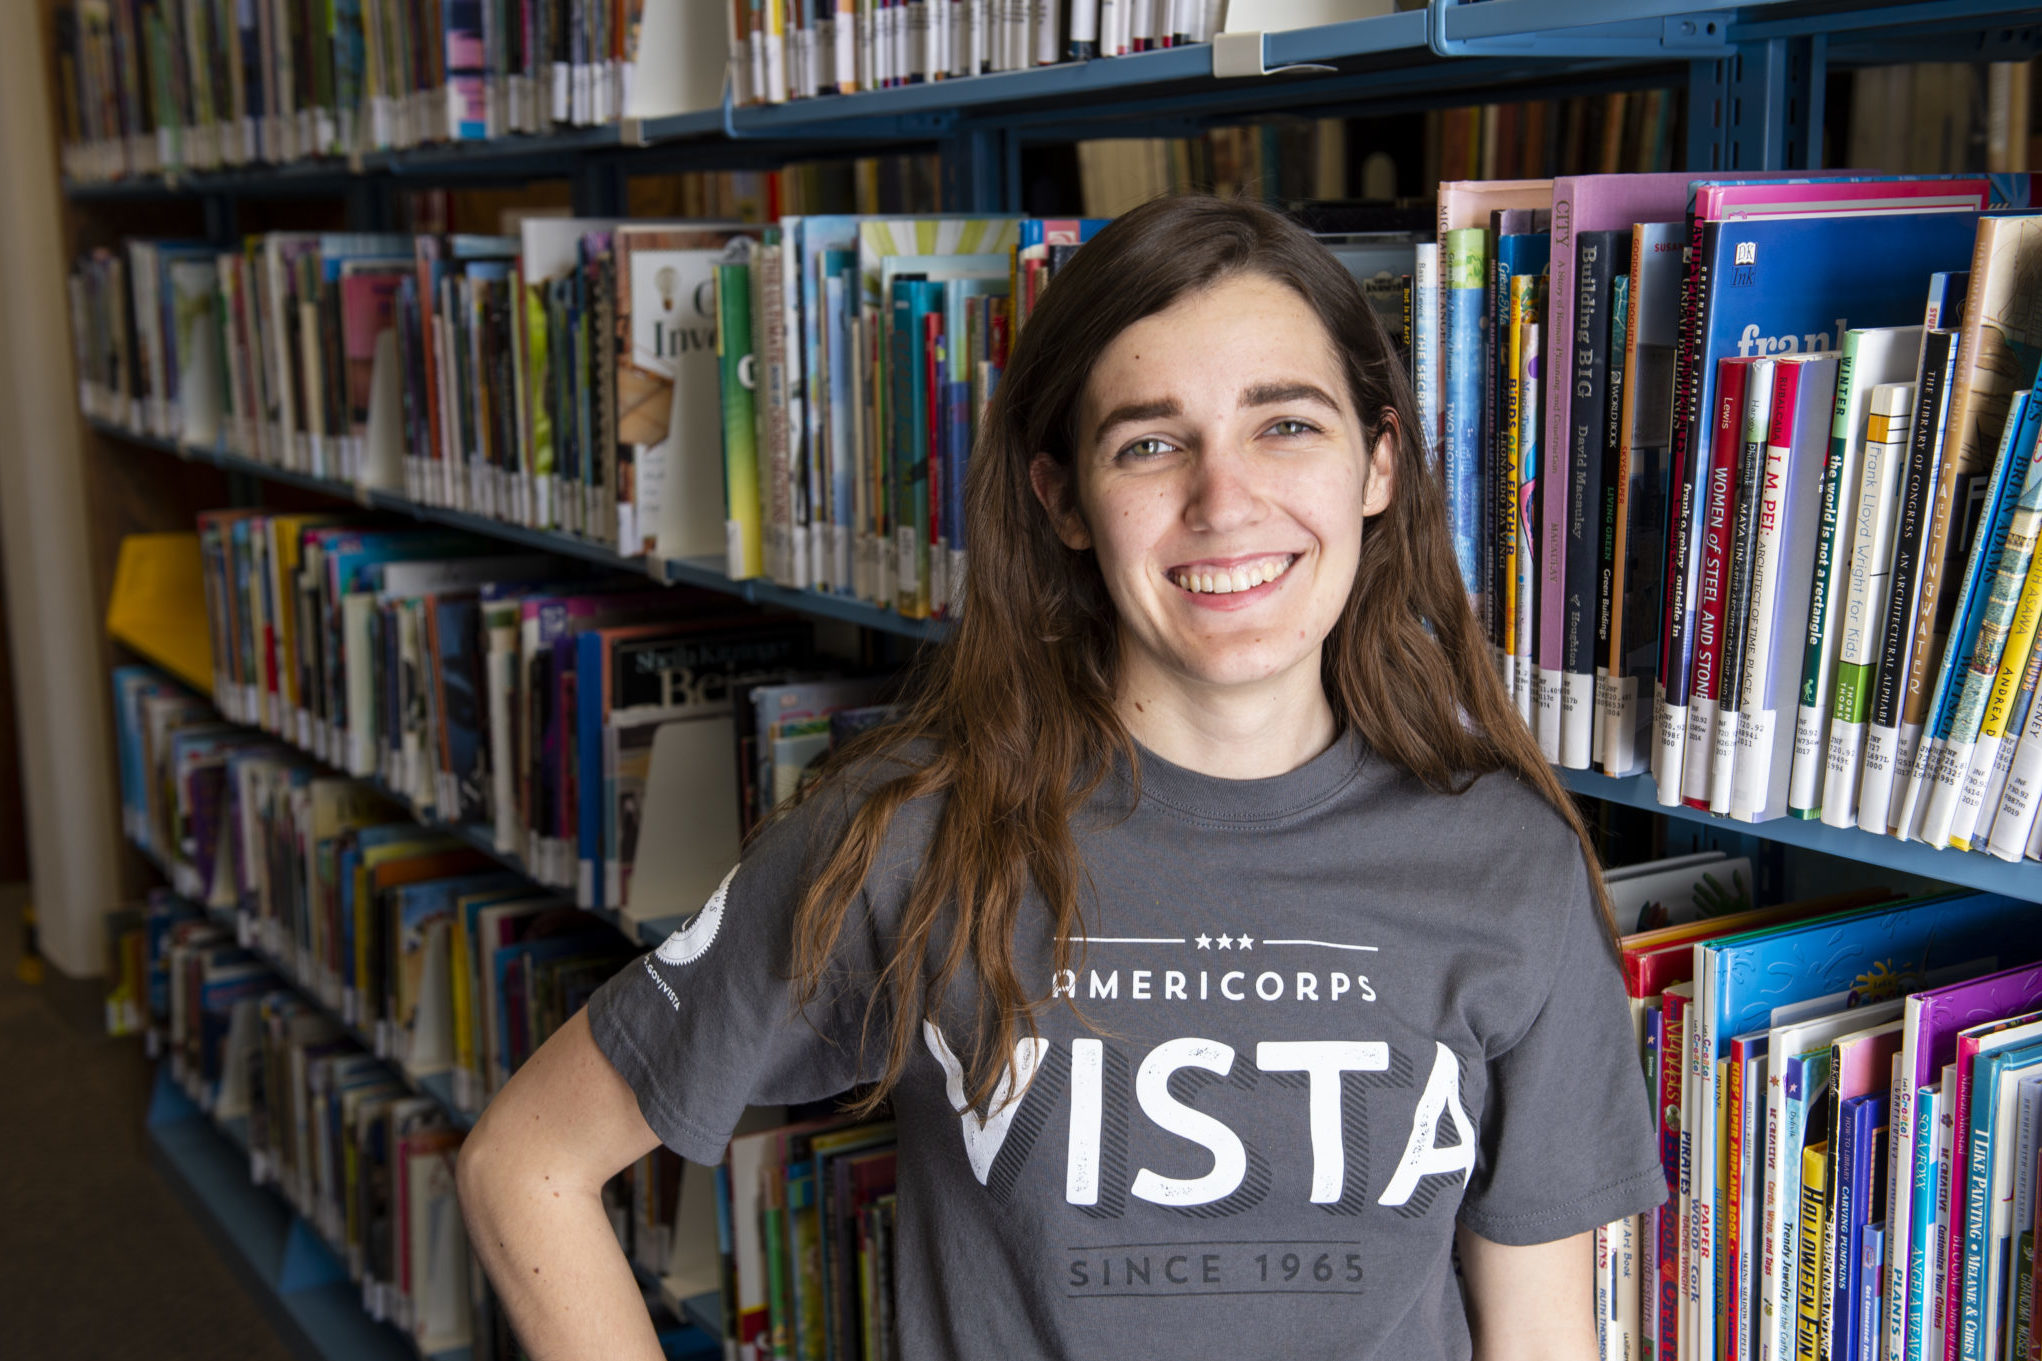 woman standing in front of books in a library wearing a grey shirt that says VISTA